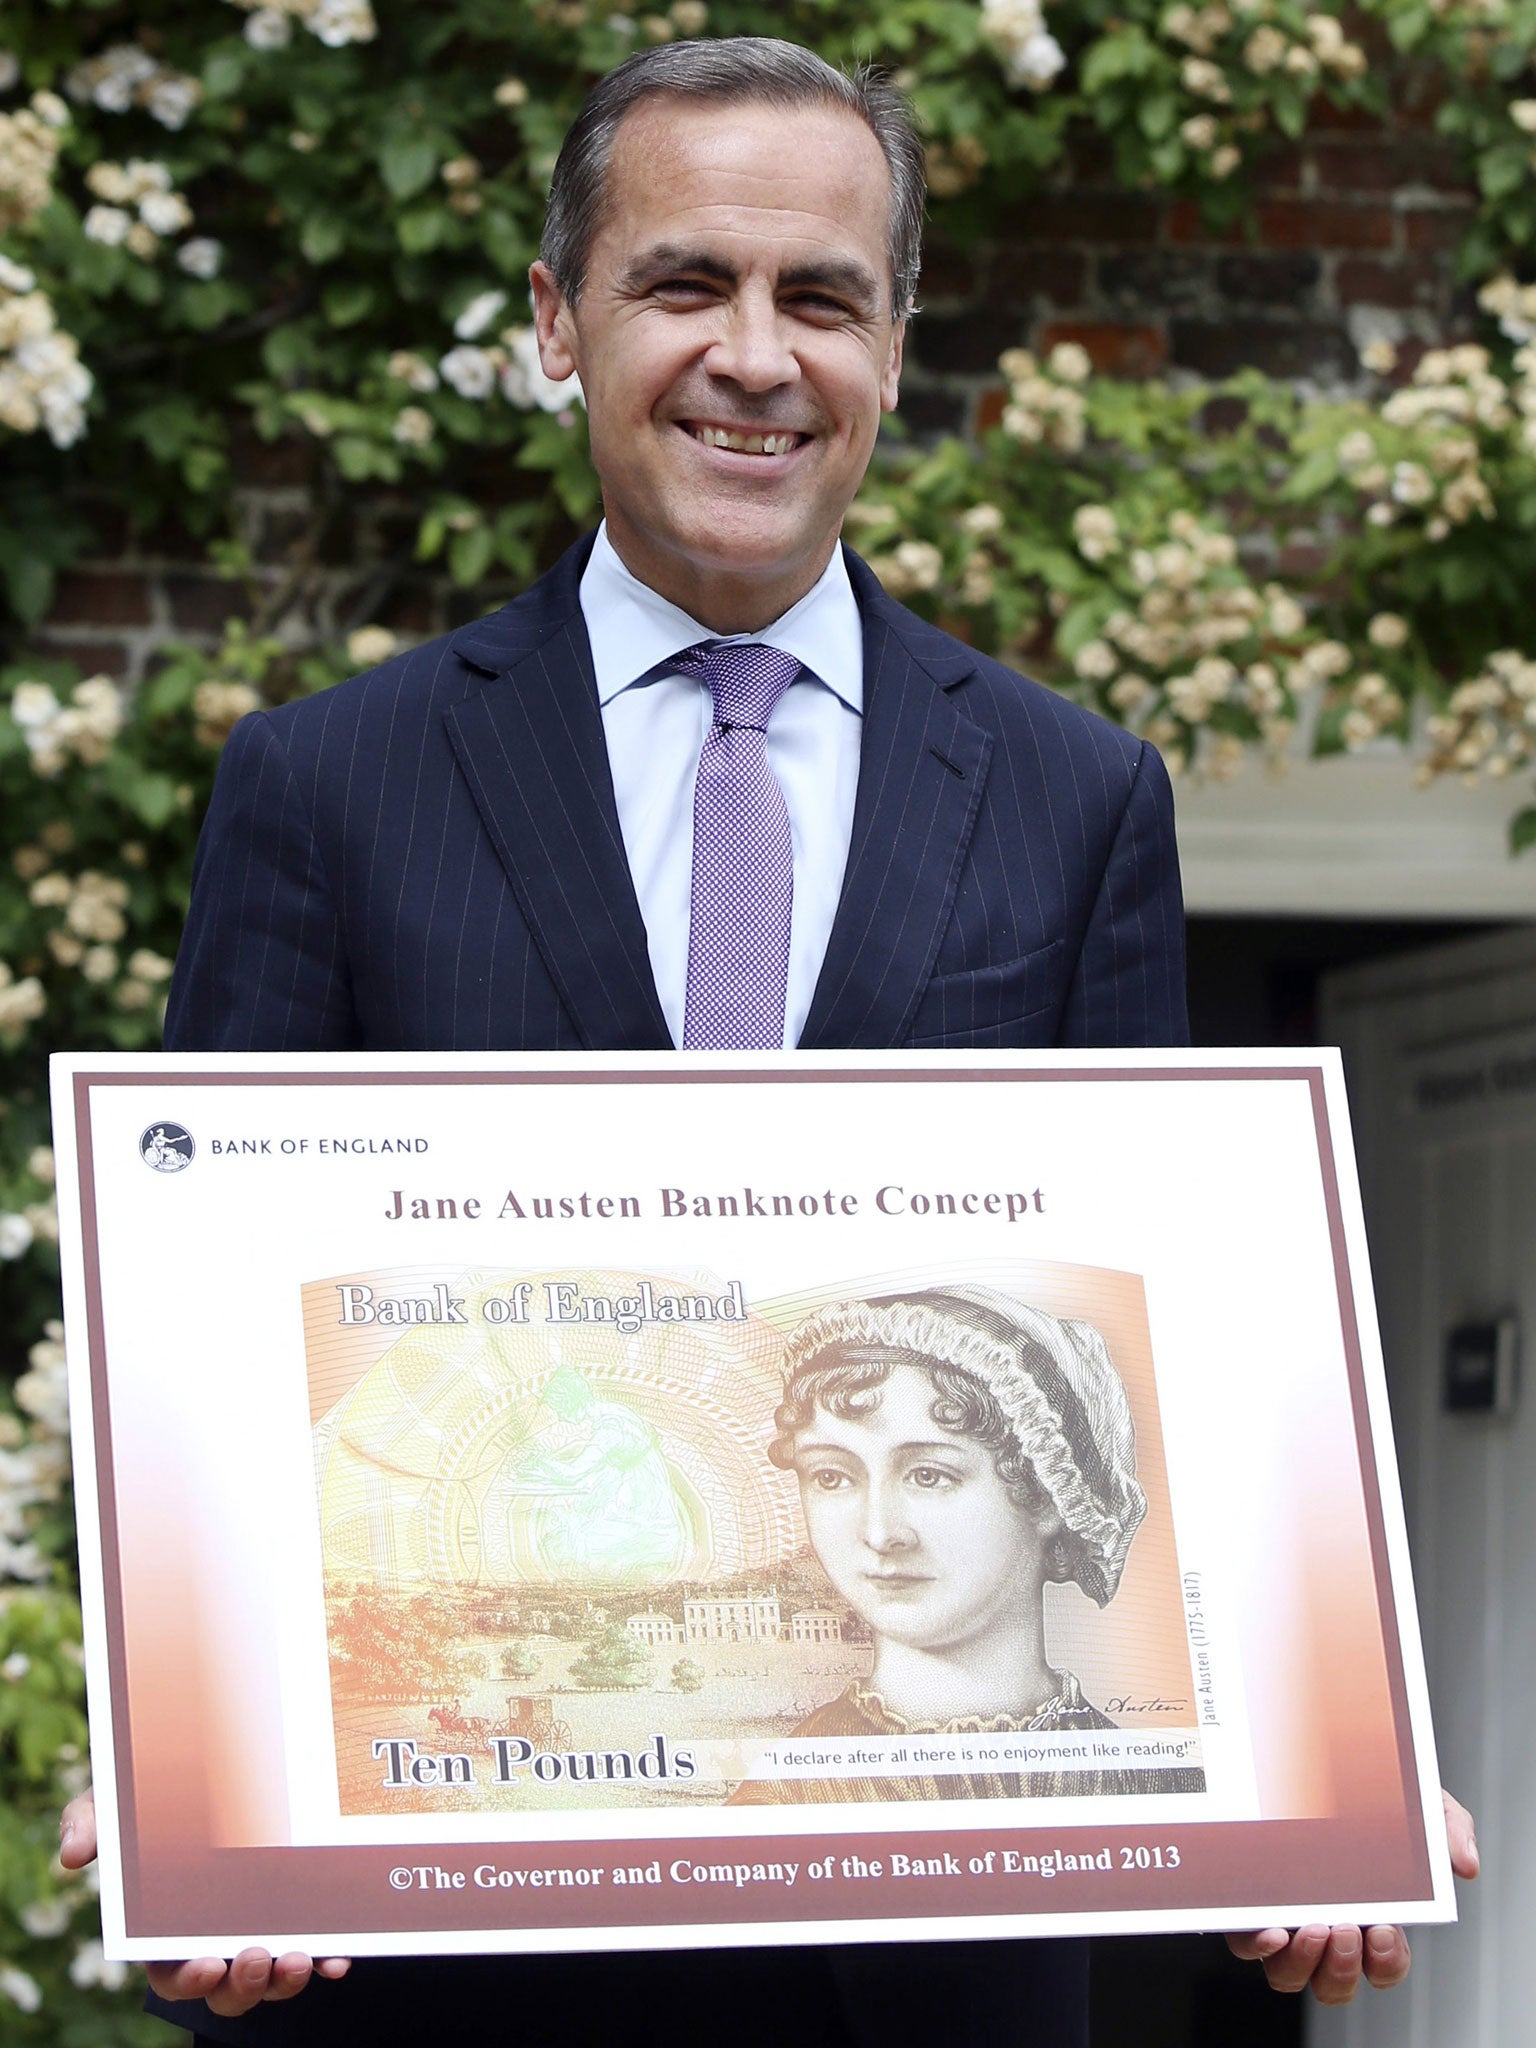 Mark Carney with the new £10 note